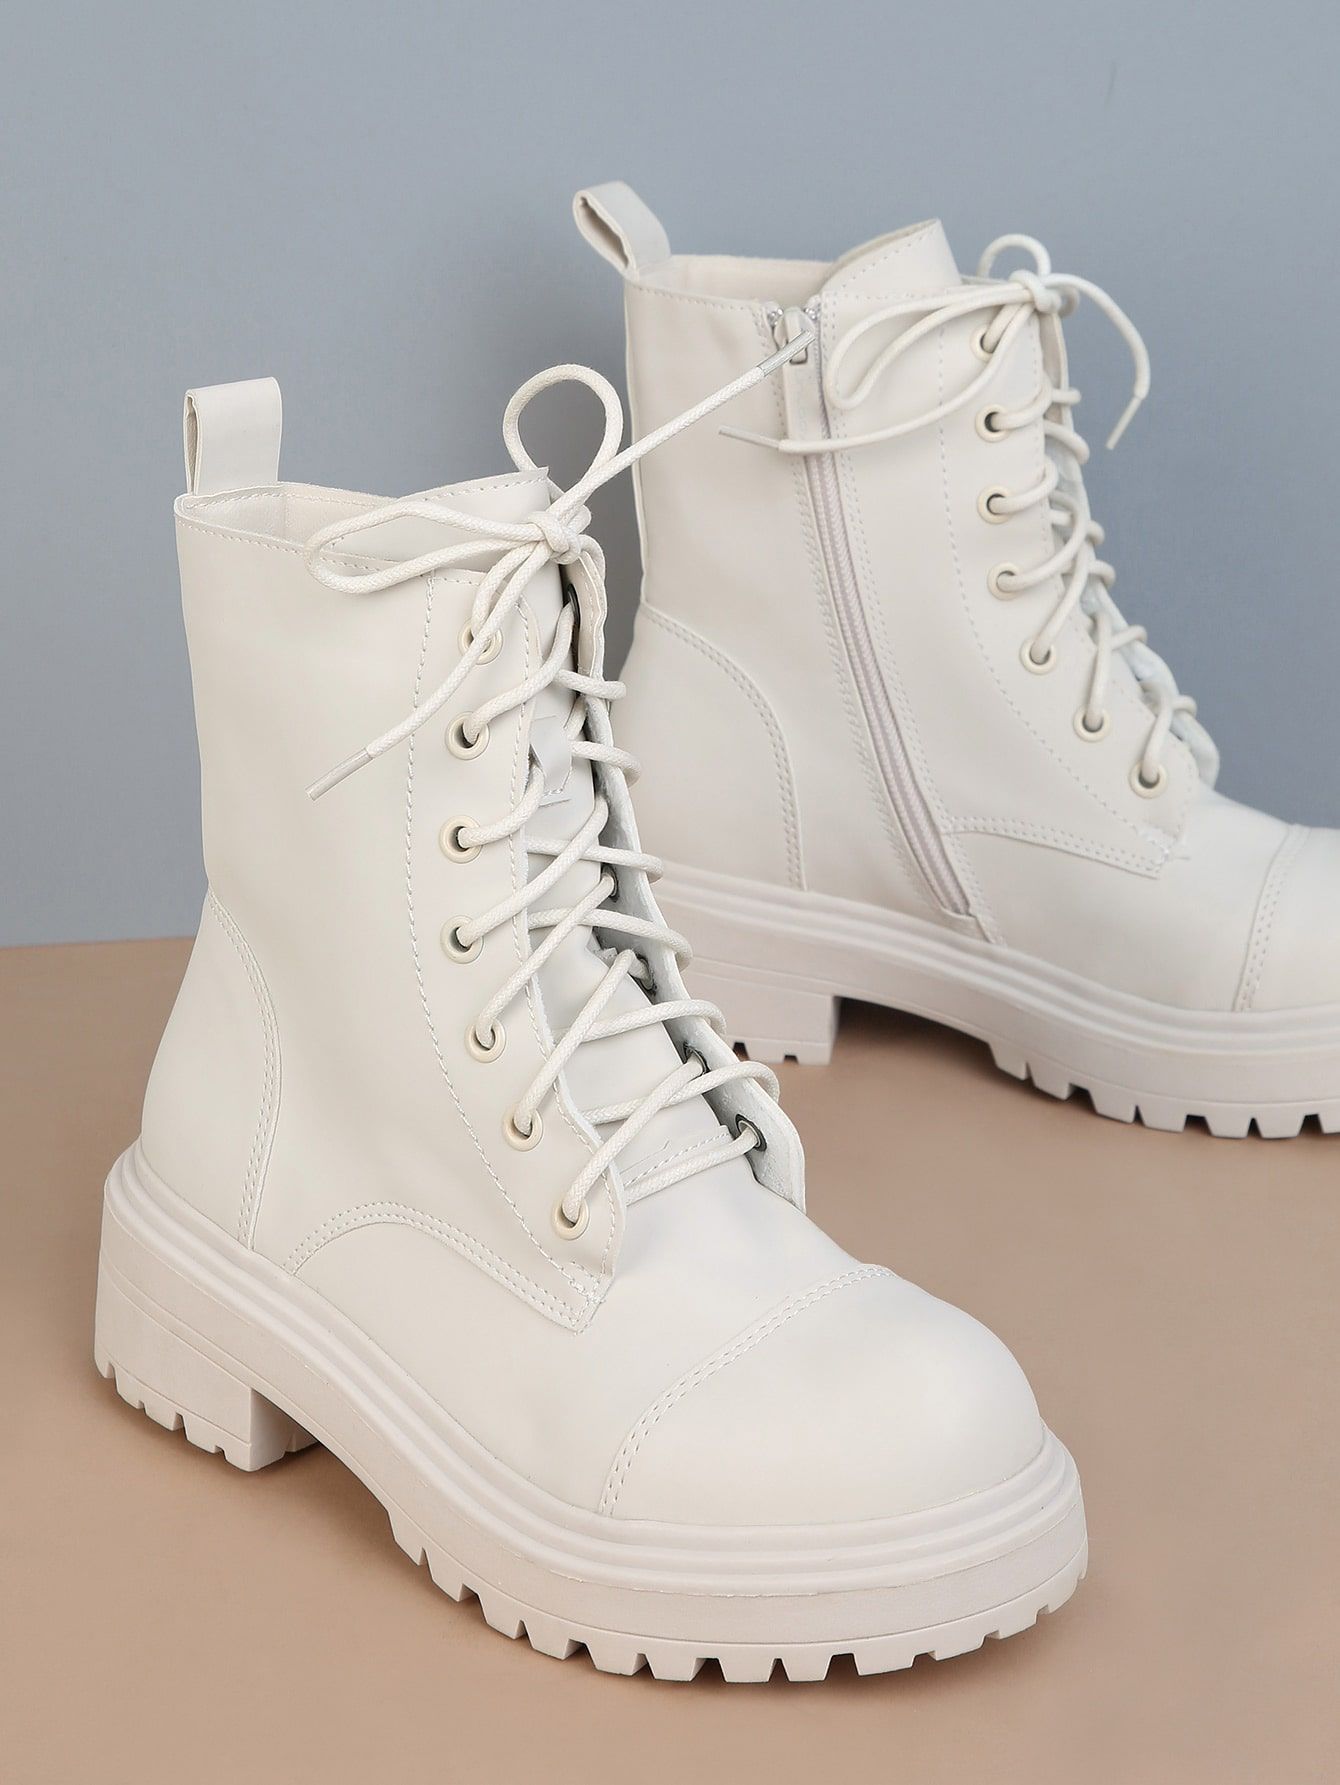 White Combat Boots Outfits